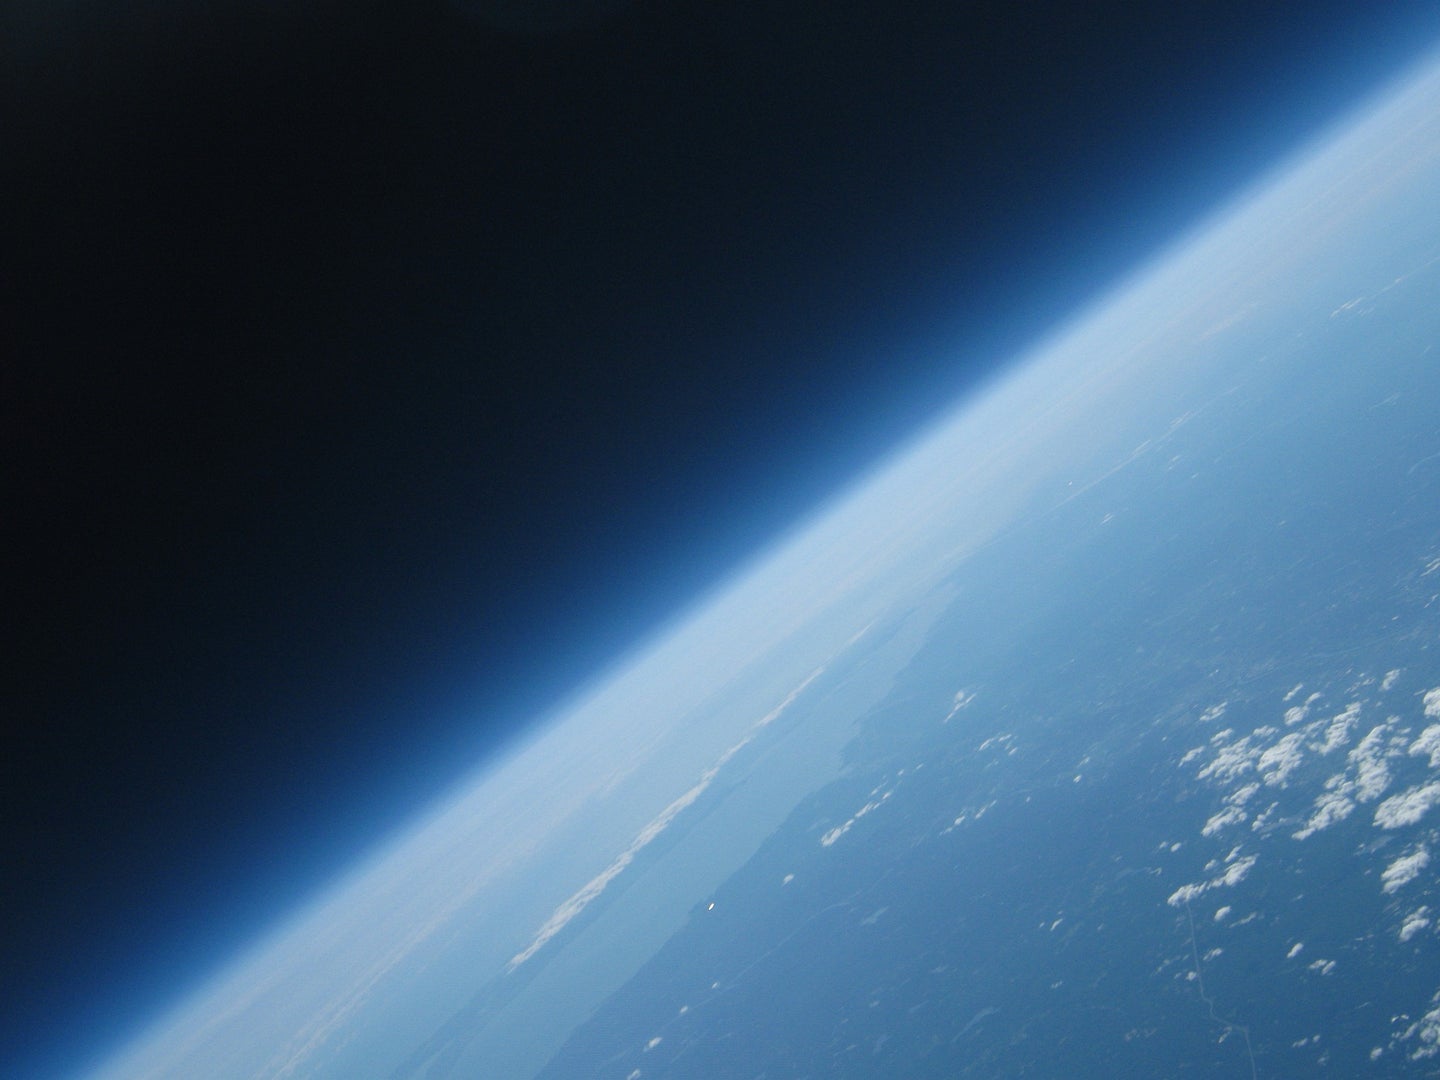 A portion of Earth, showing the boundary between space and the planet's atmosphere.